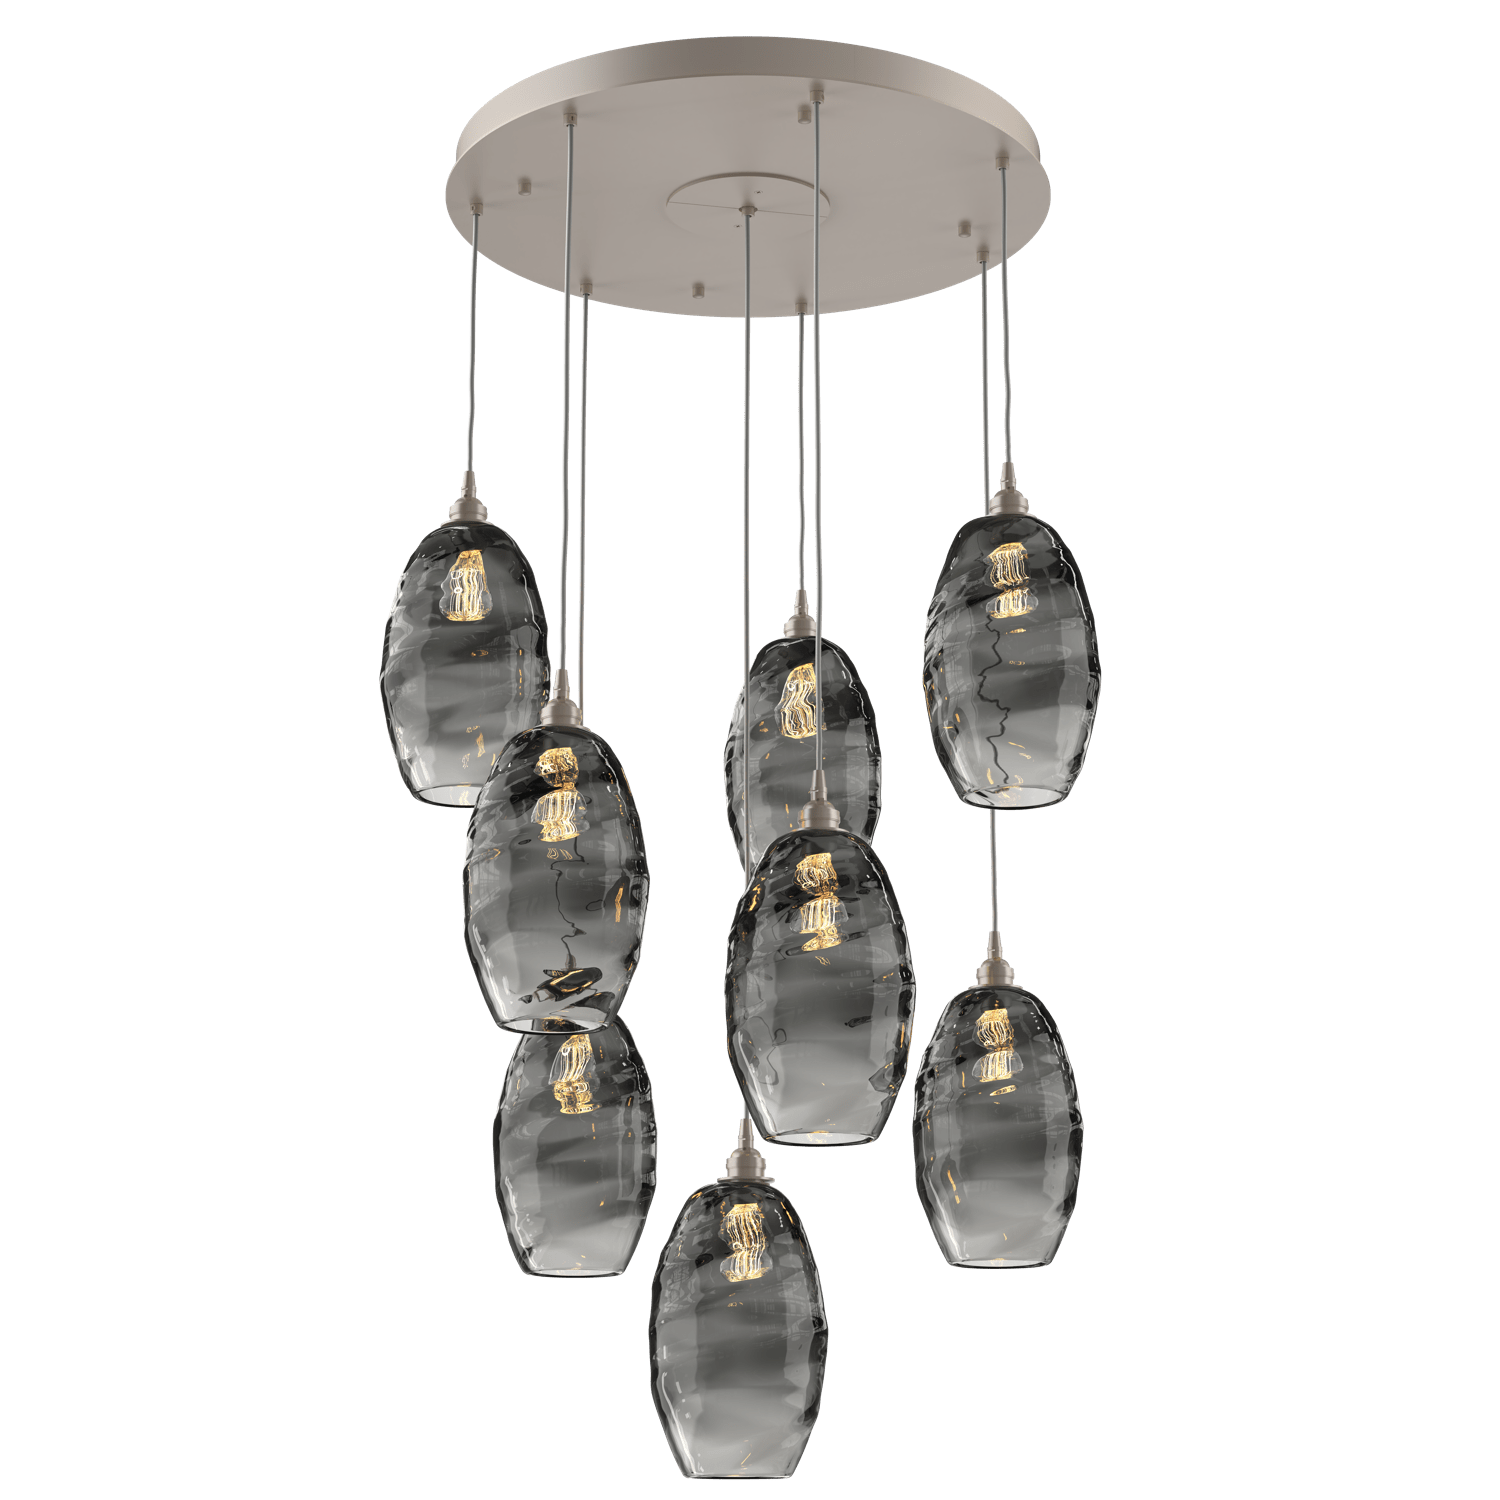 CHB0035-08-BS-OS-Hammerton-Studio-Optic-Blown-Glass-Elisse-8-light-round-pendant-chandelier-with-metallic-beige-silver-finish-and-optic-smoke-blown-glass-shades-and-incandescent-lamping